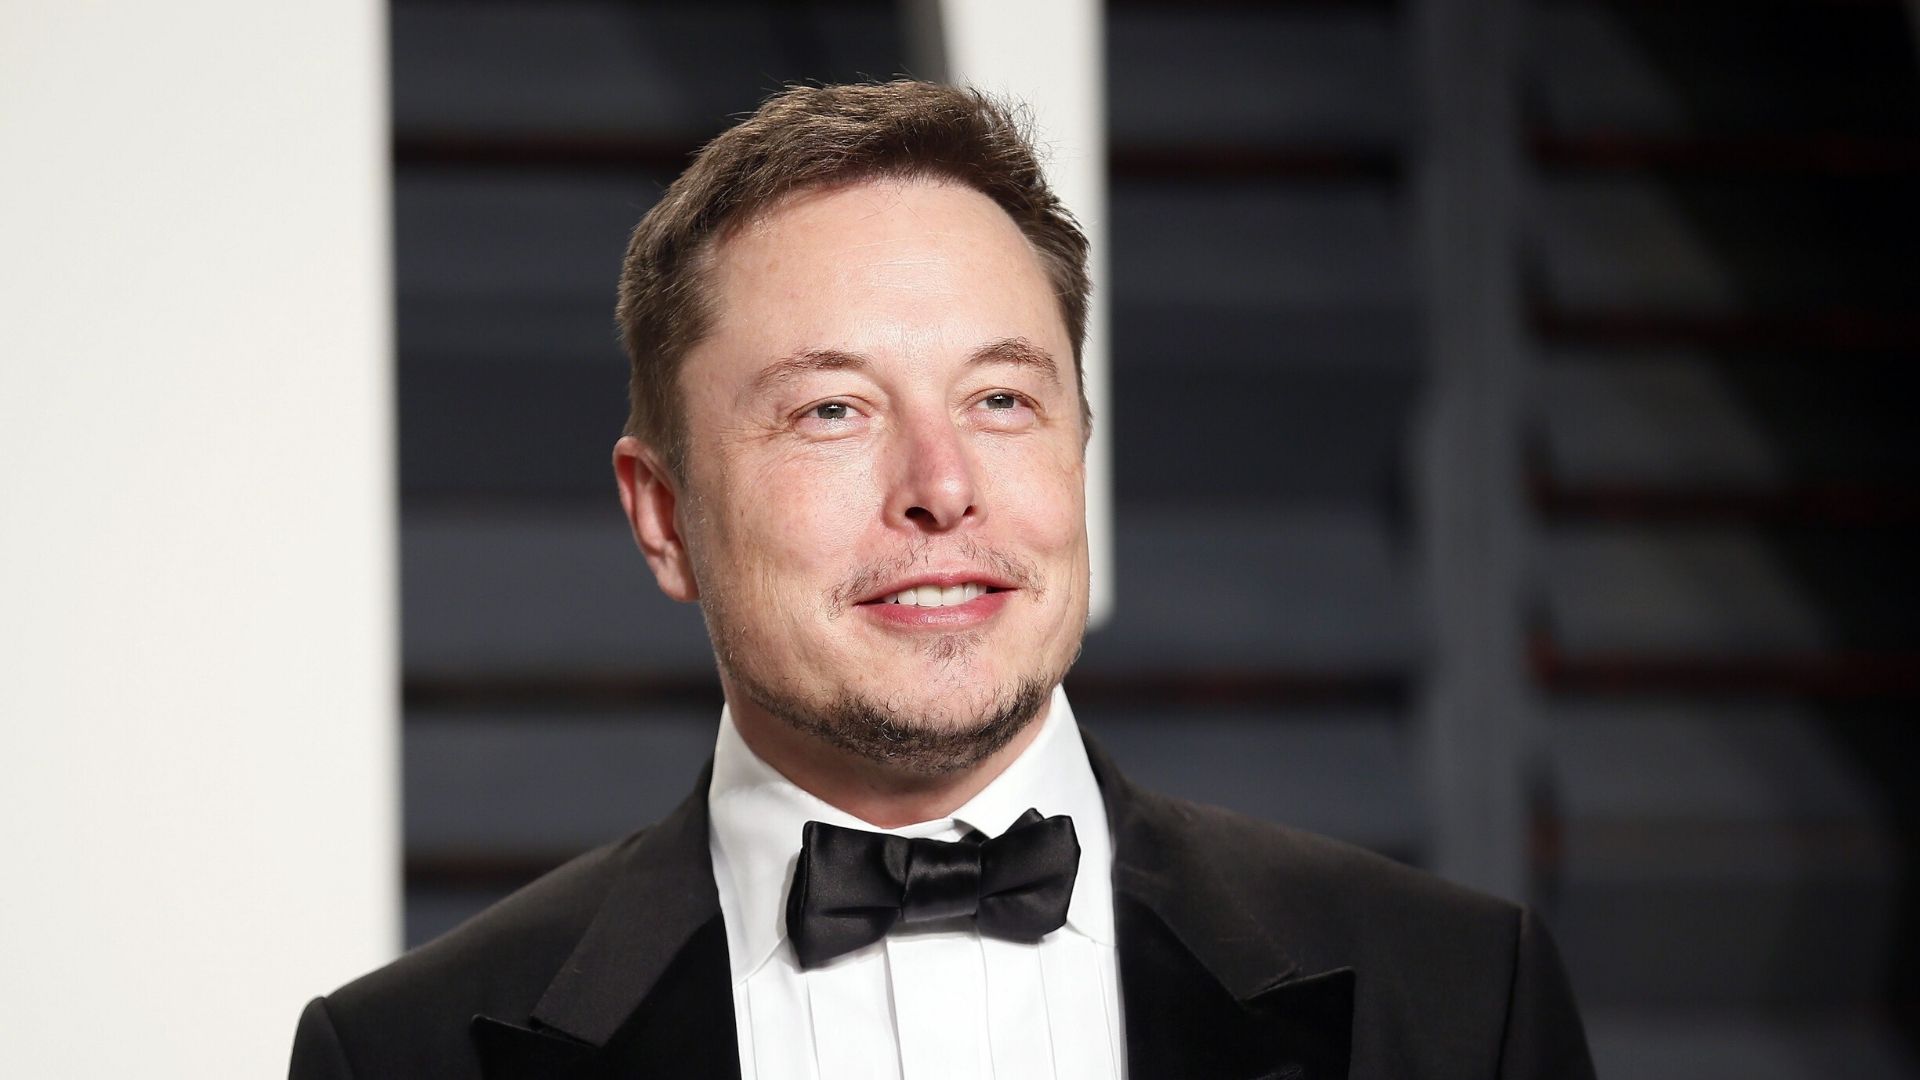 5 Elon Musk Quotes That Will Inspire You To Change the World - The